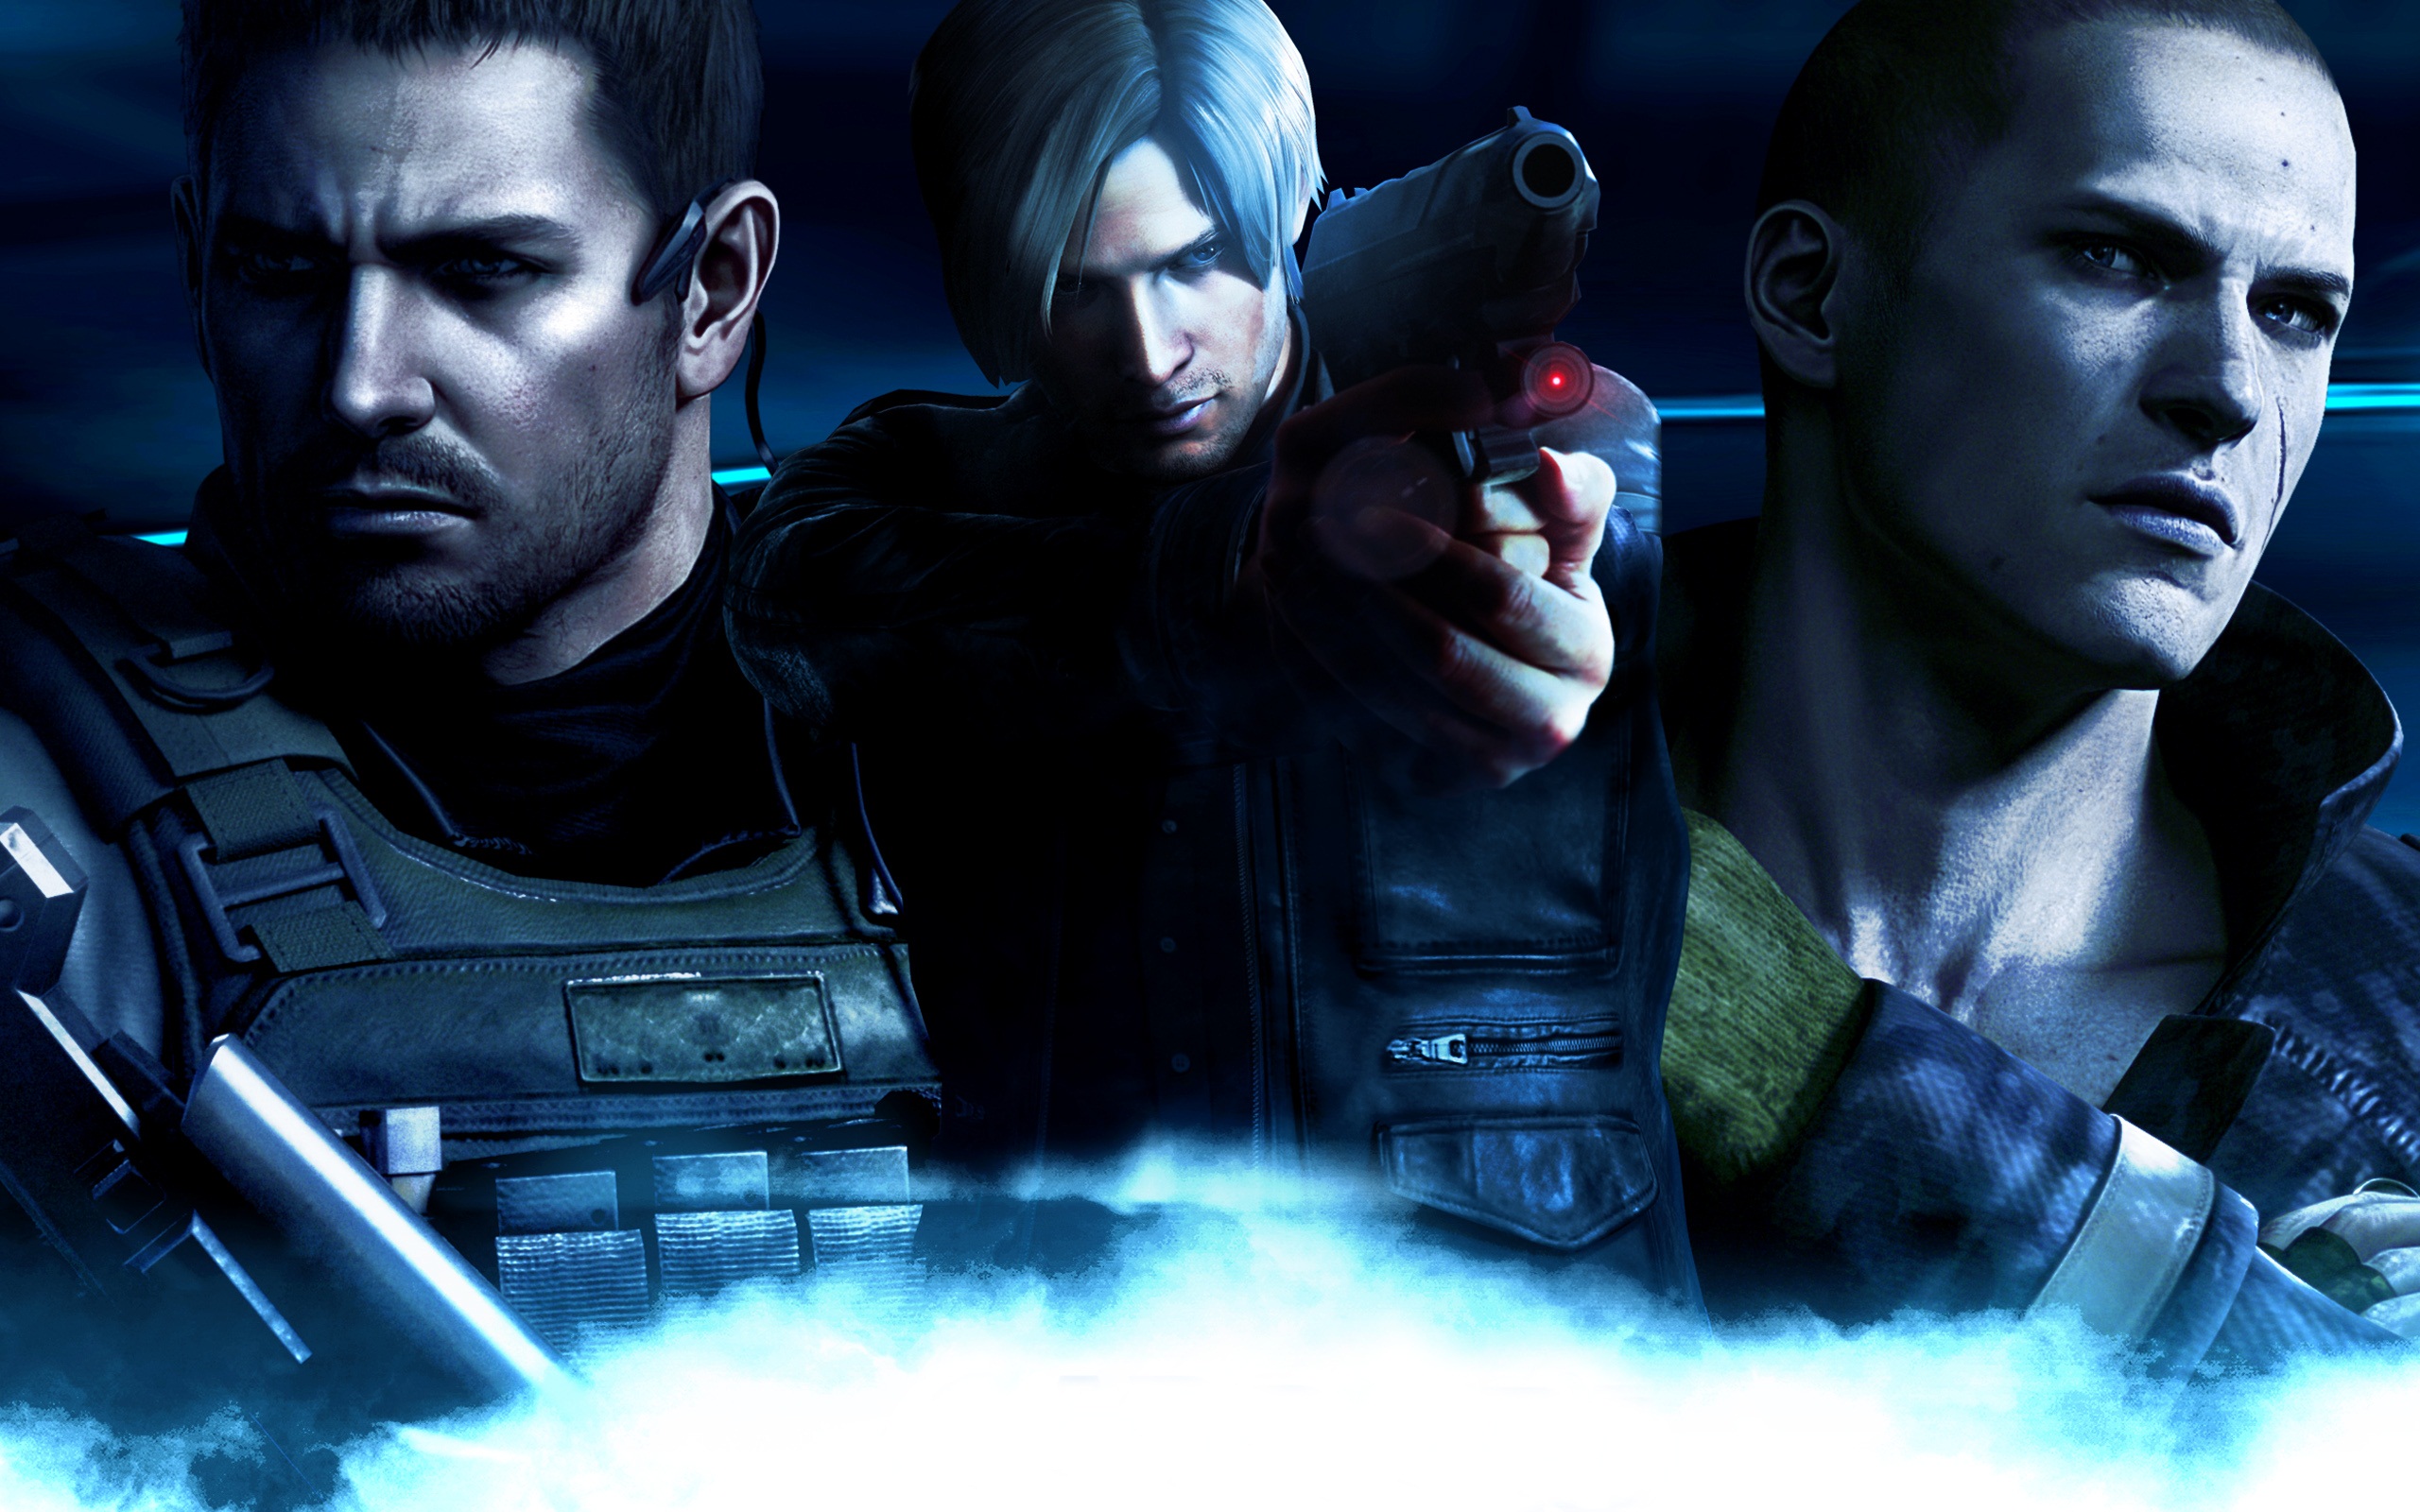 Resident Evil 6 HD game wallpapers #6 - 2560x1600